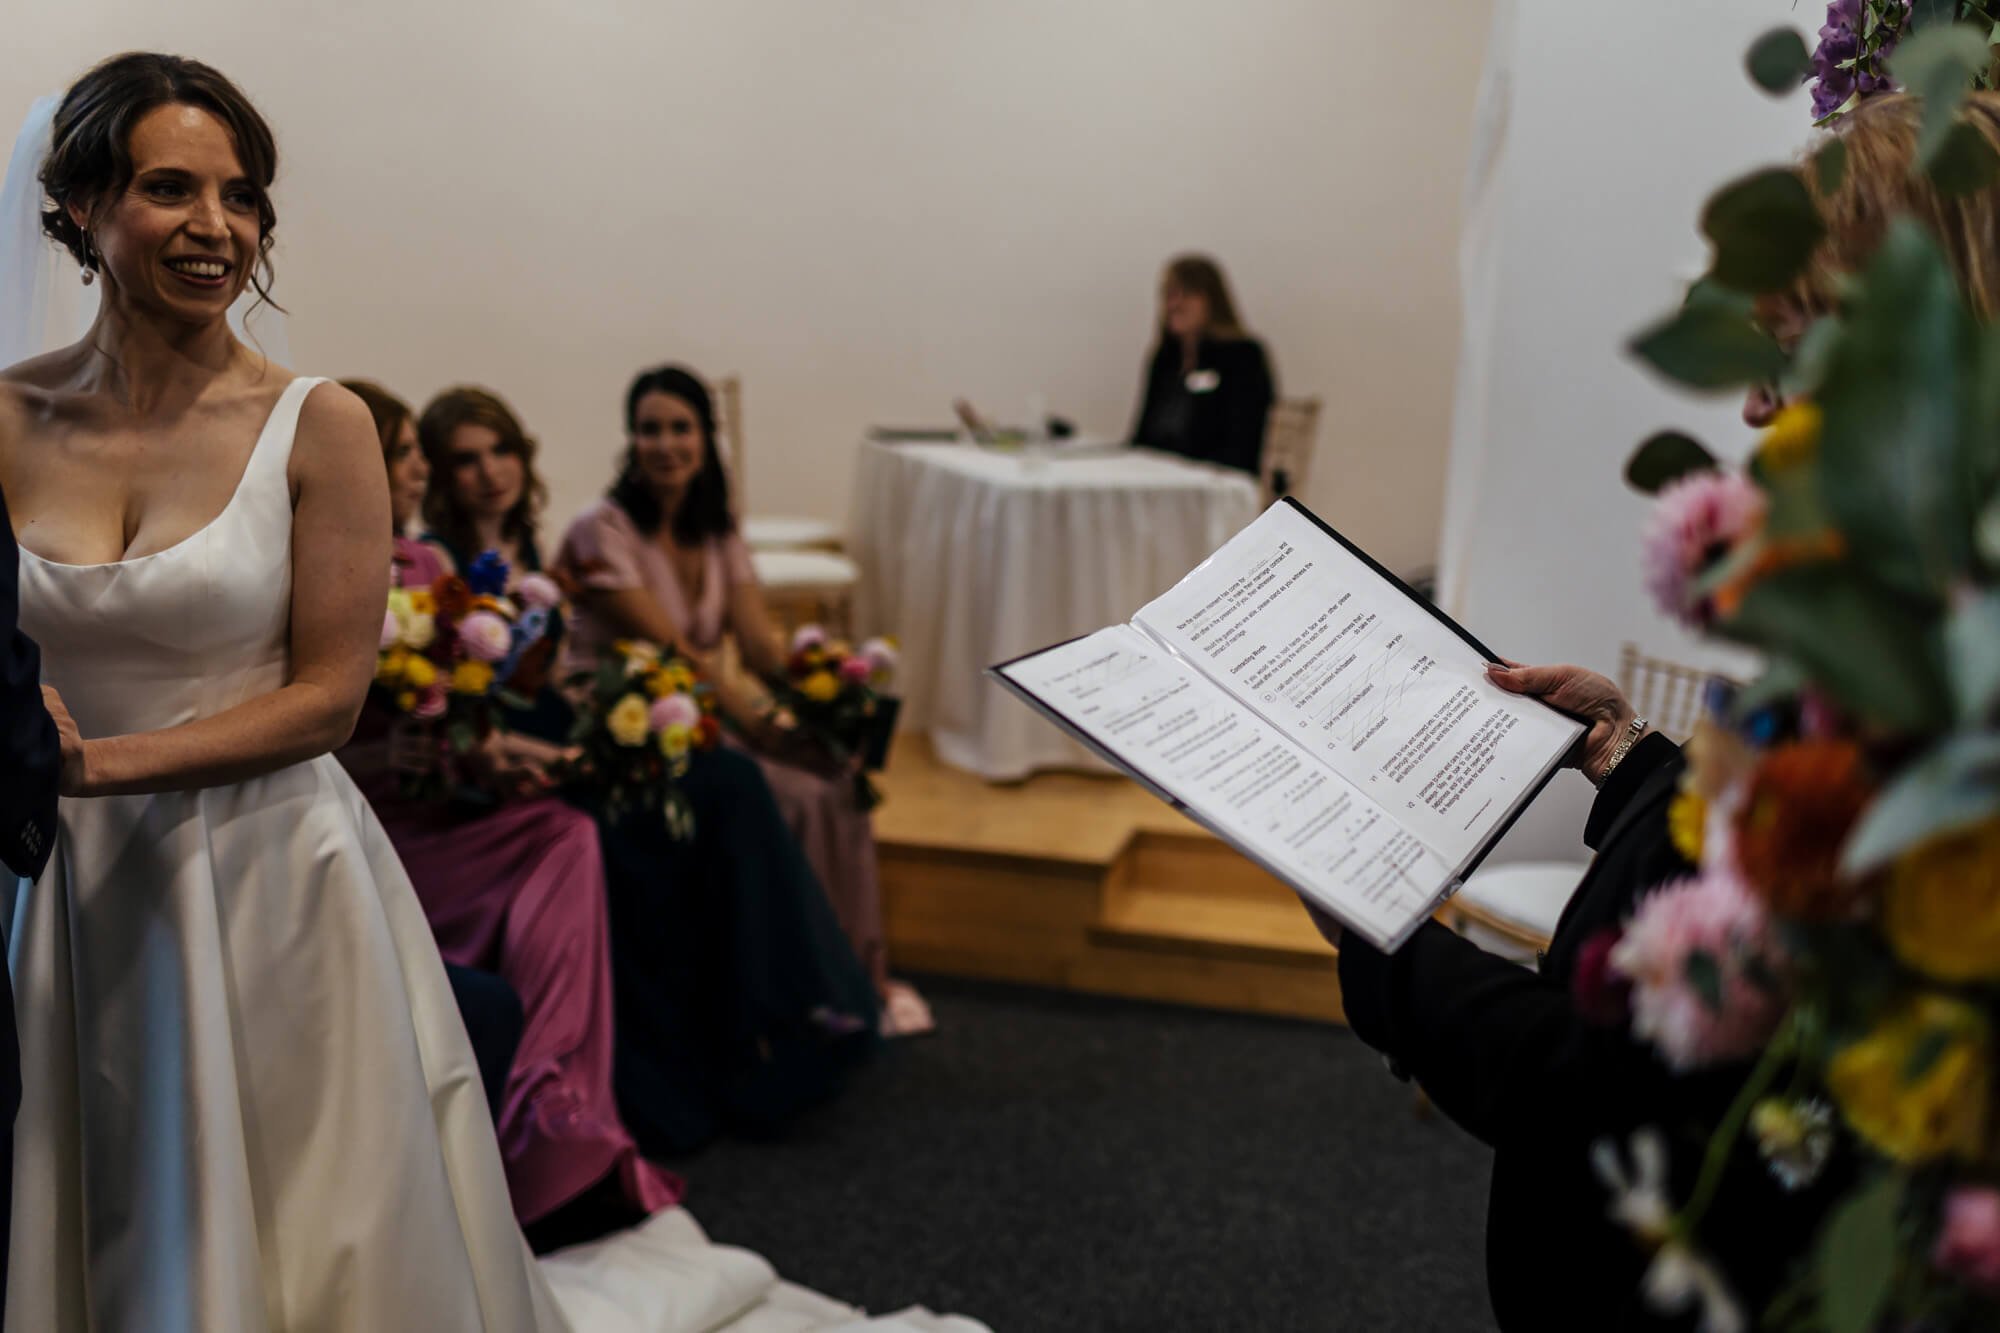 The celebrant conducts the wedding ceremony in Yorkshire